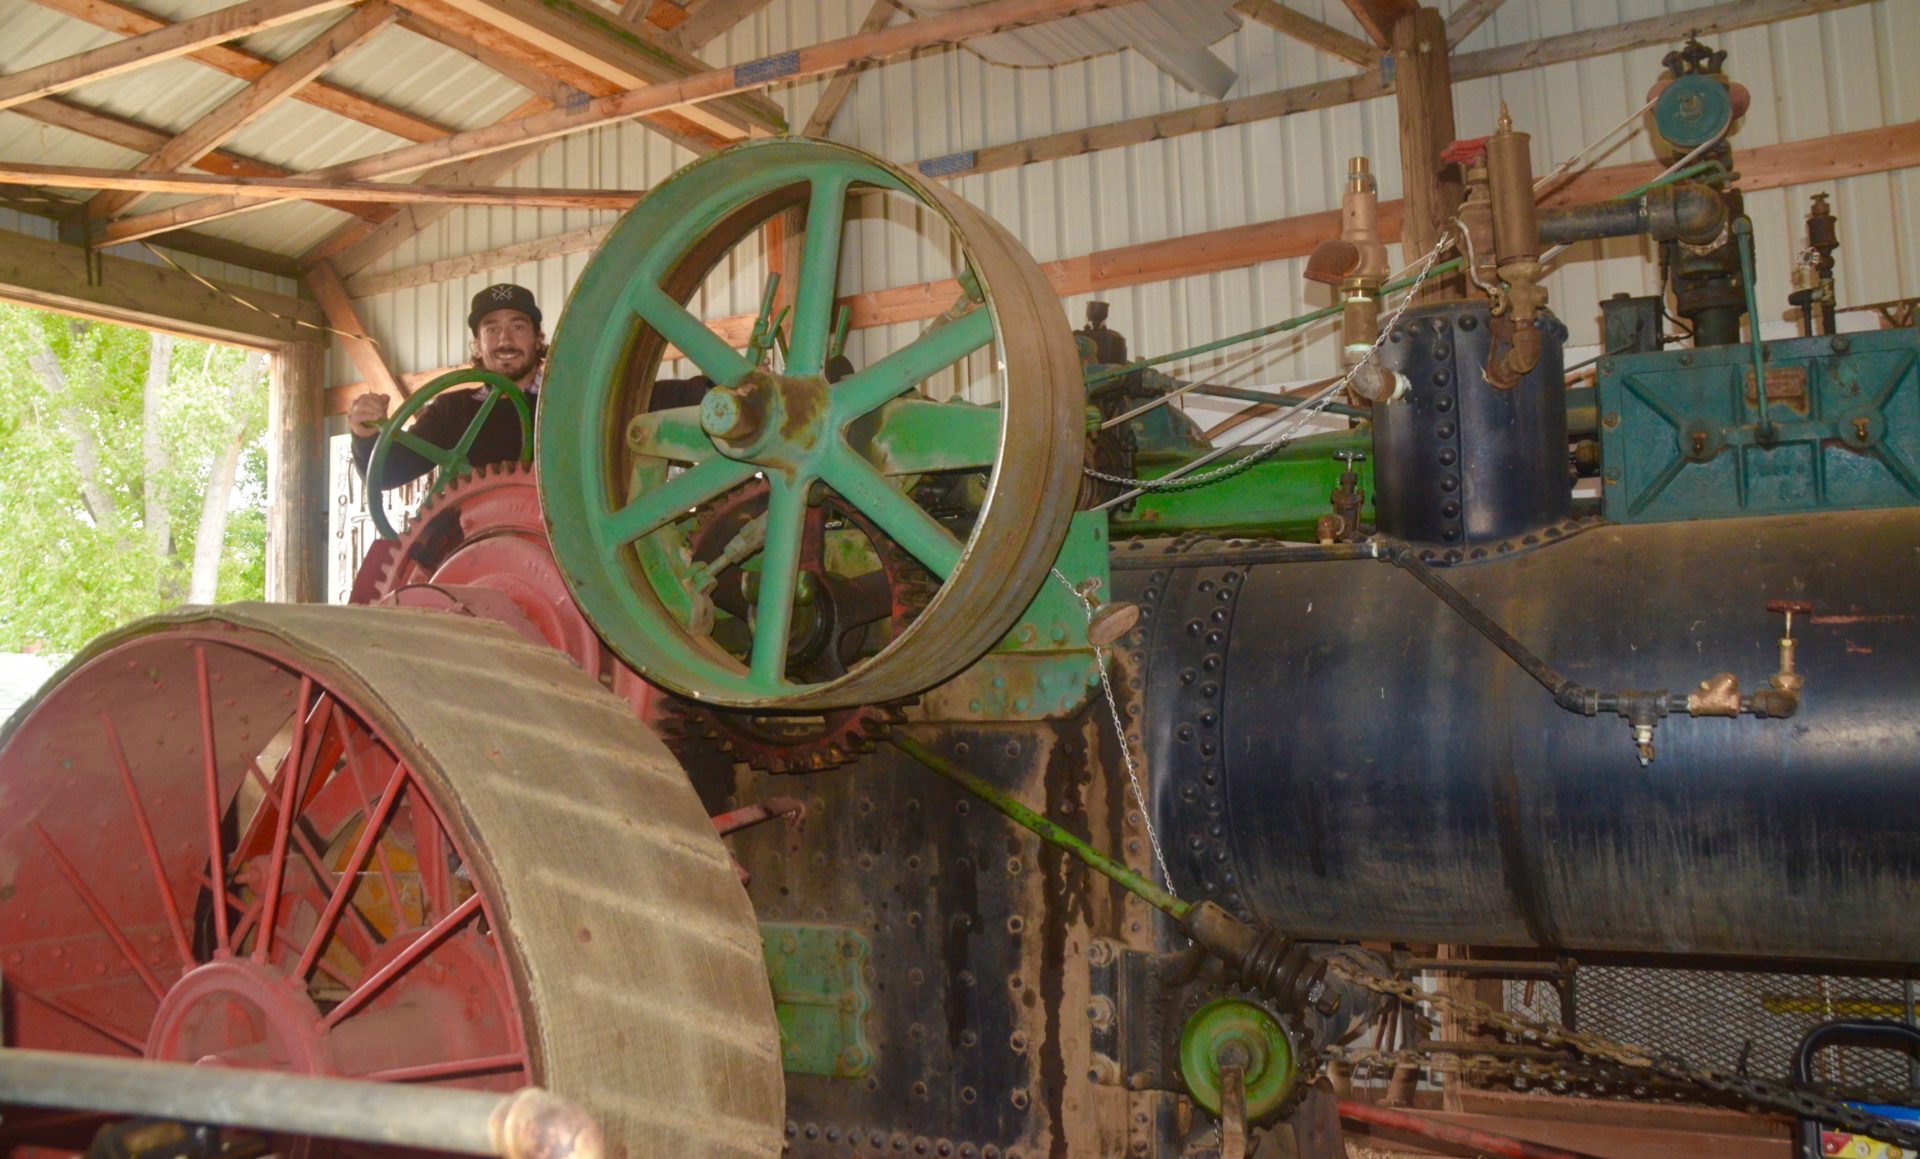 Dale on a 1903 Case Steam Engine Tractor